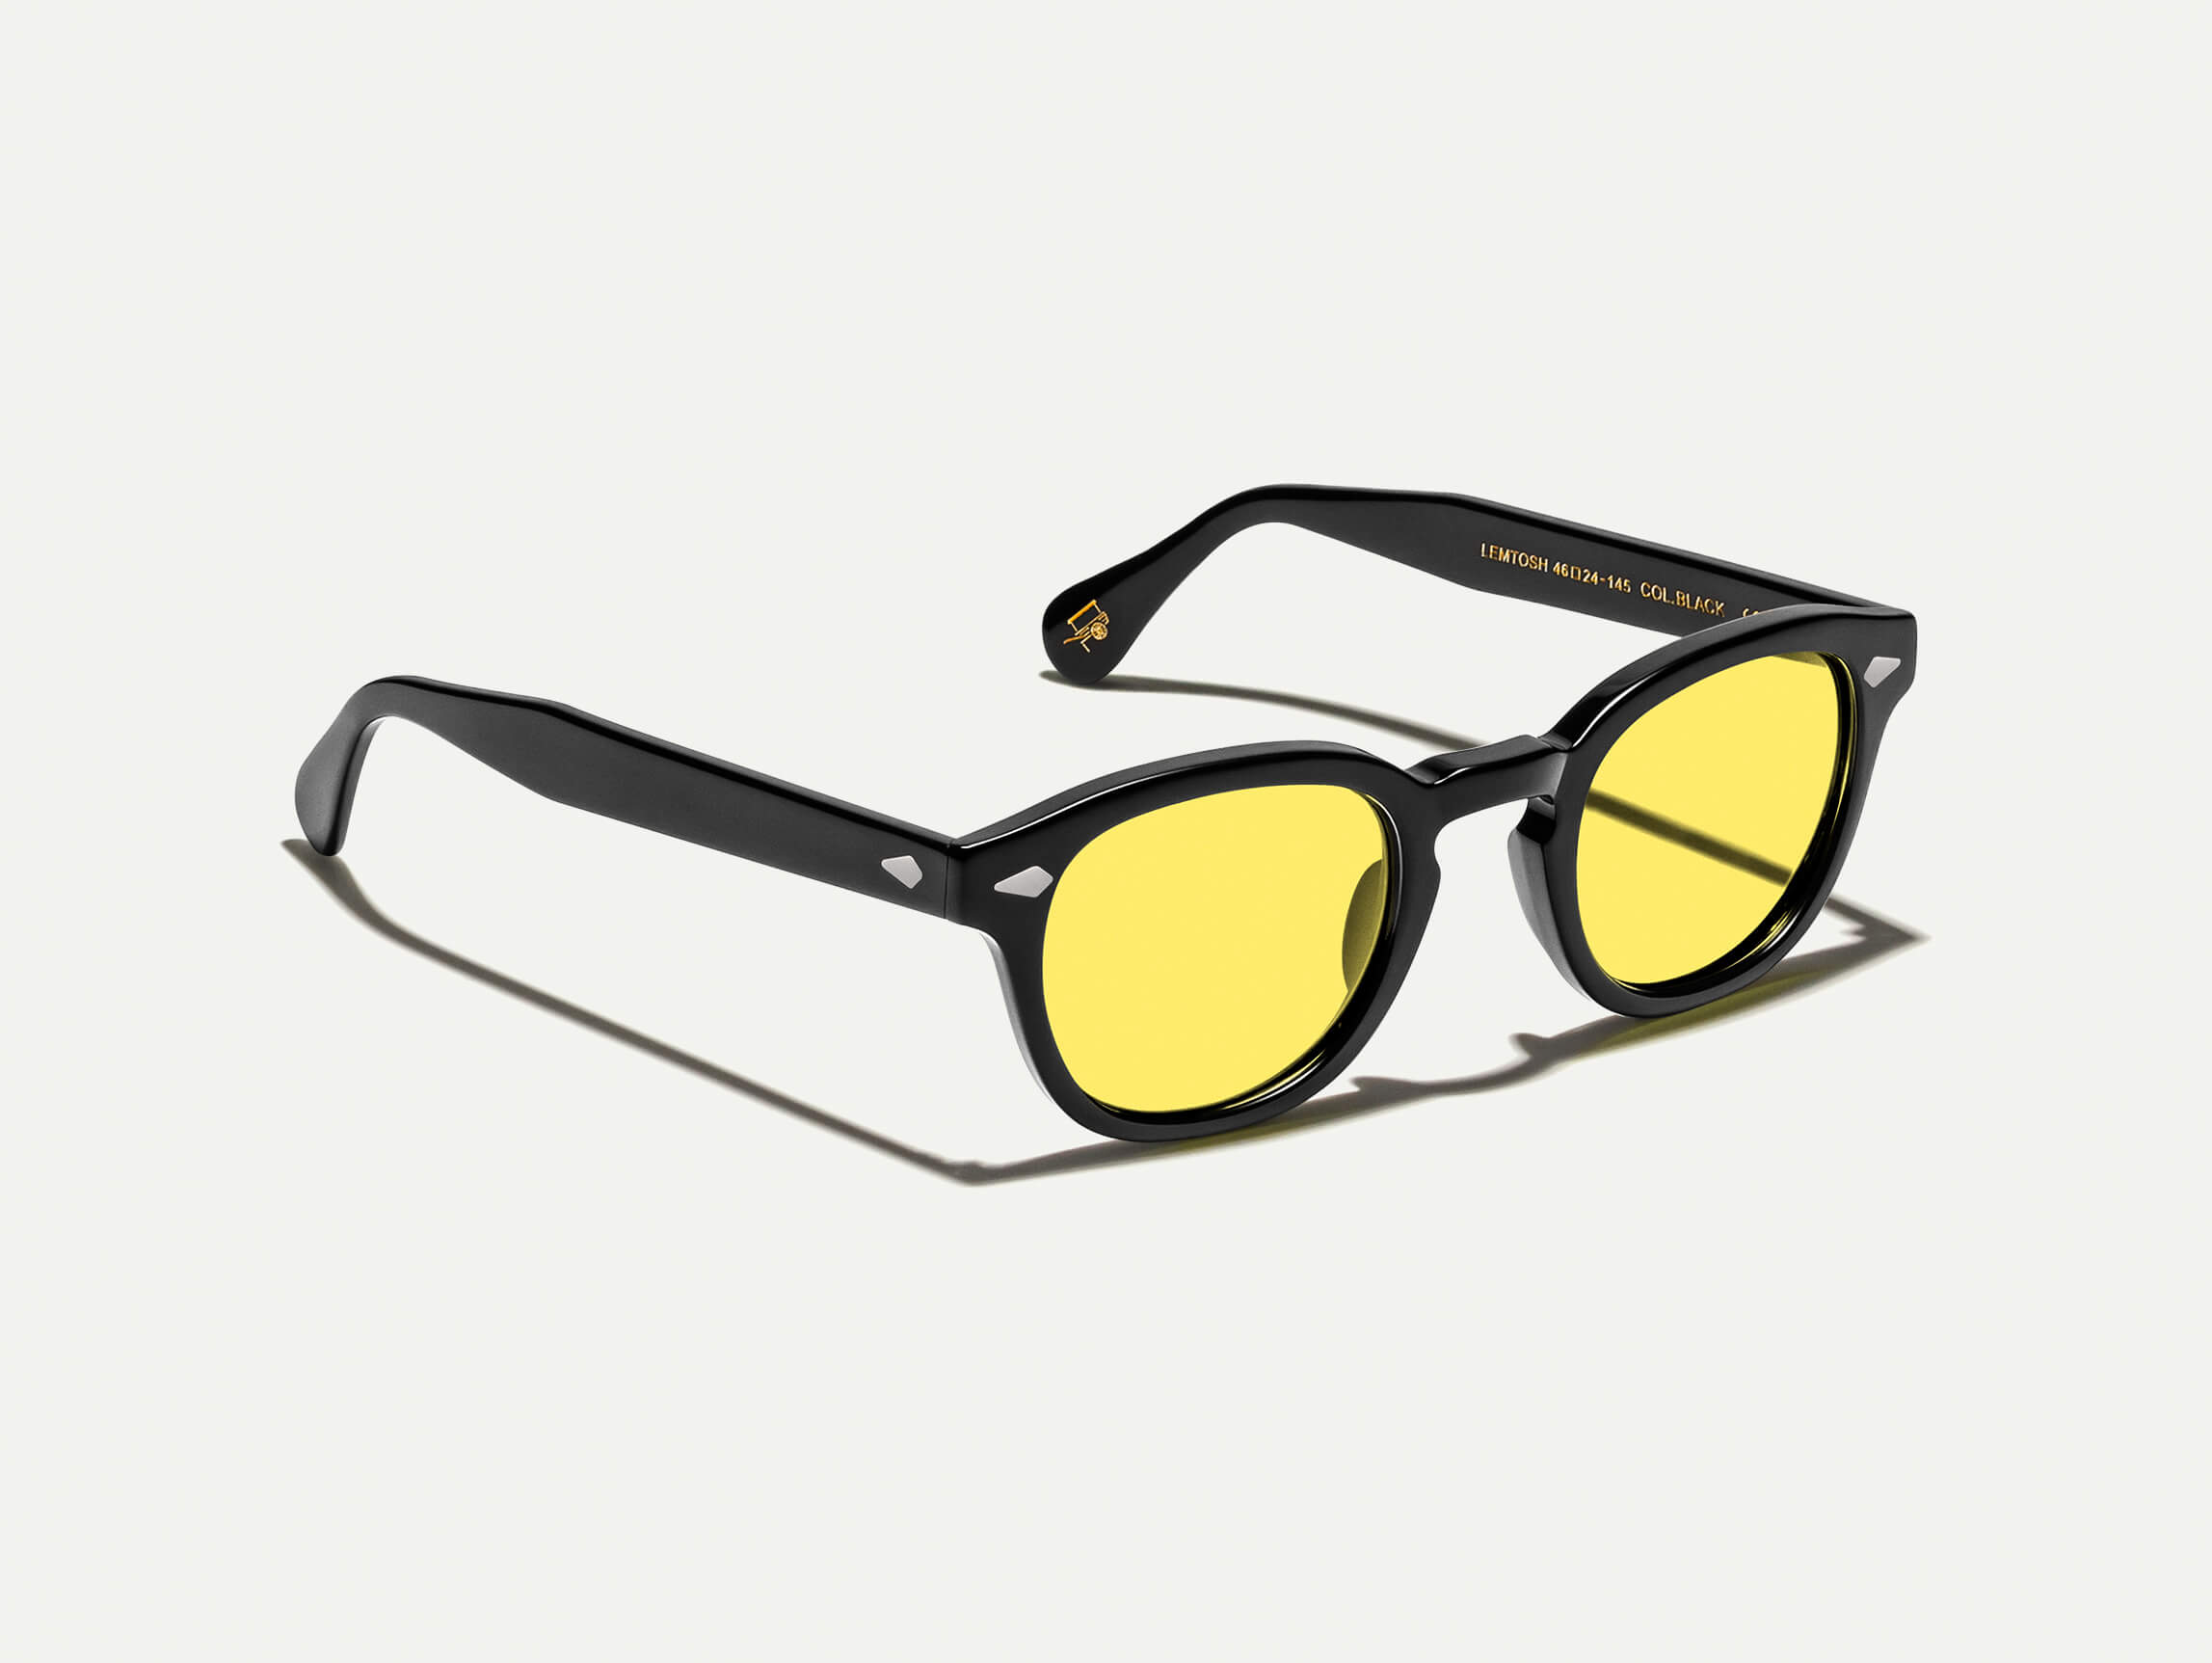 The LEMTOSH Black with Mellow Yellow Tinted Lenses